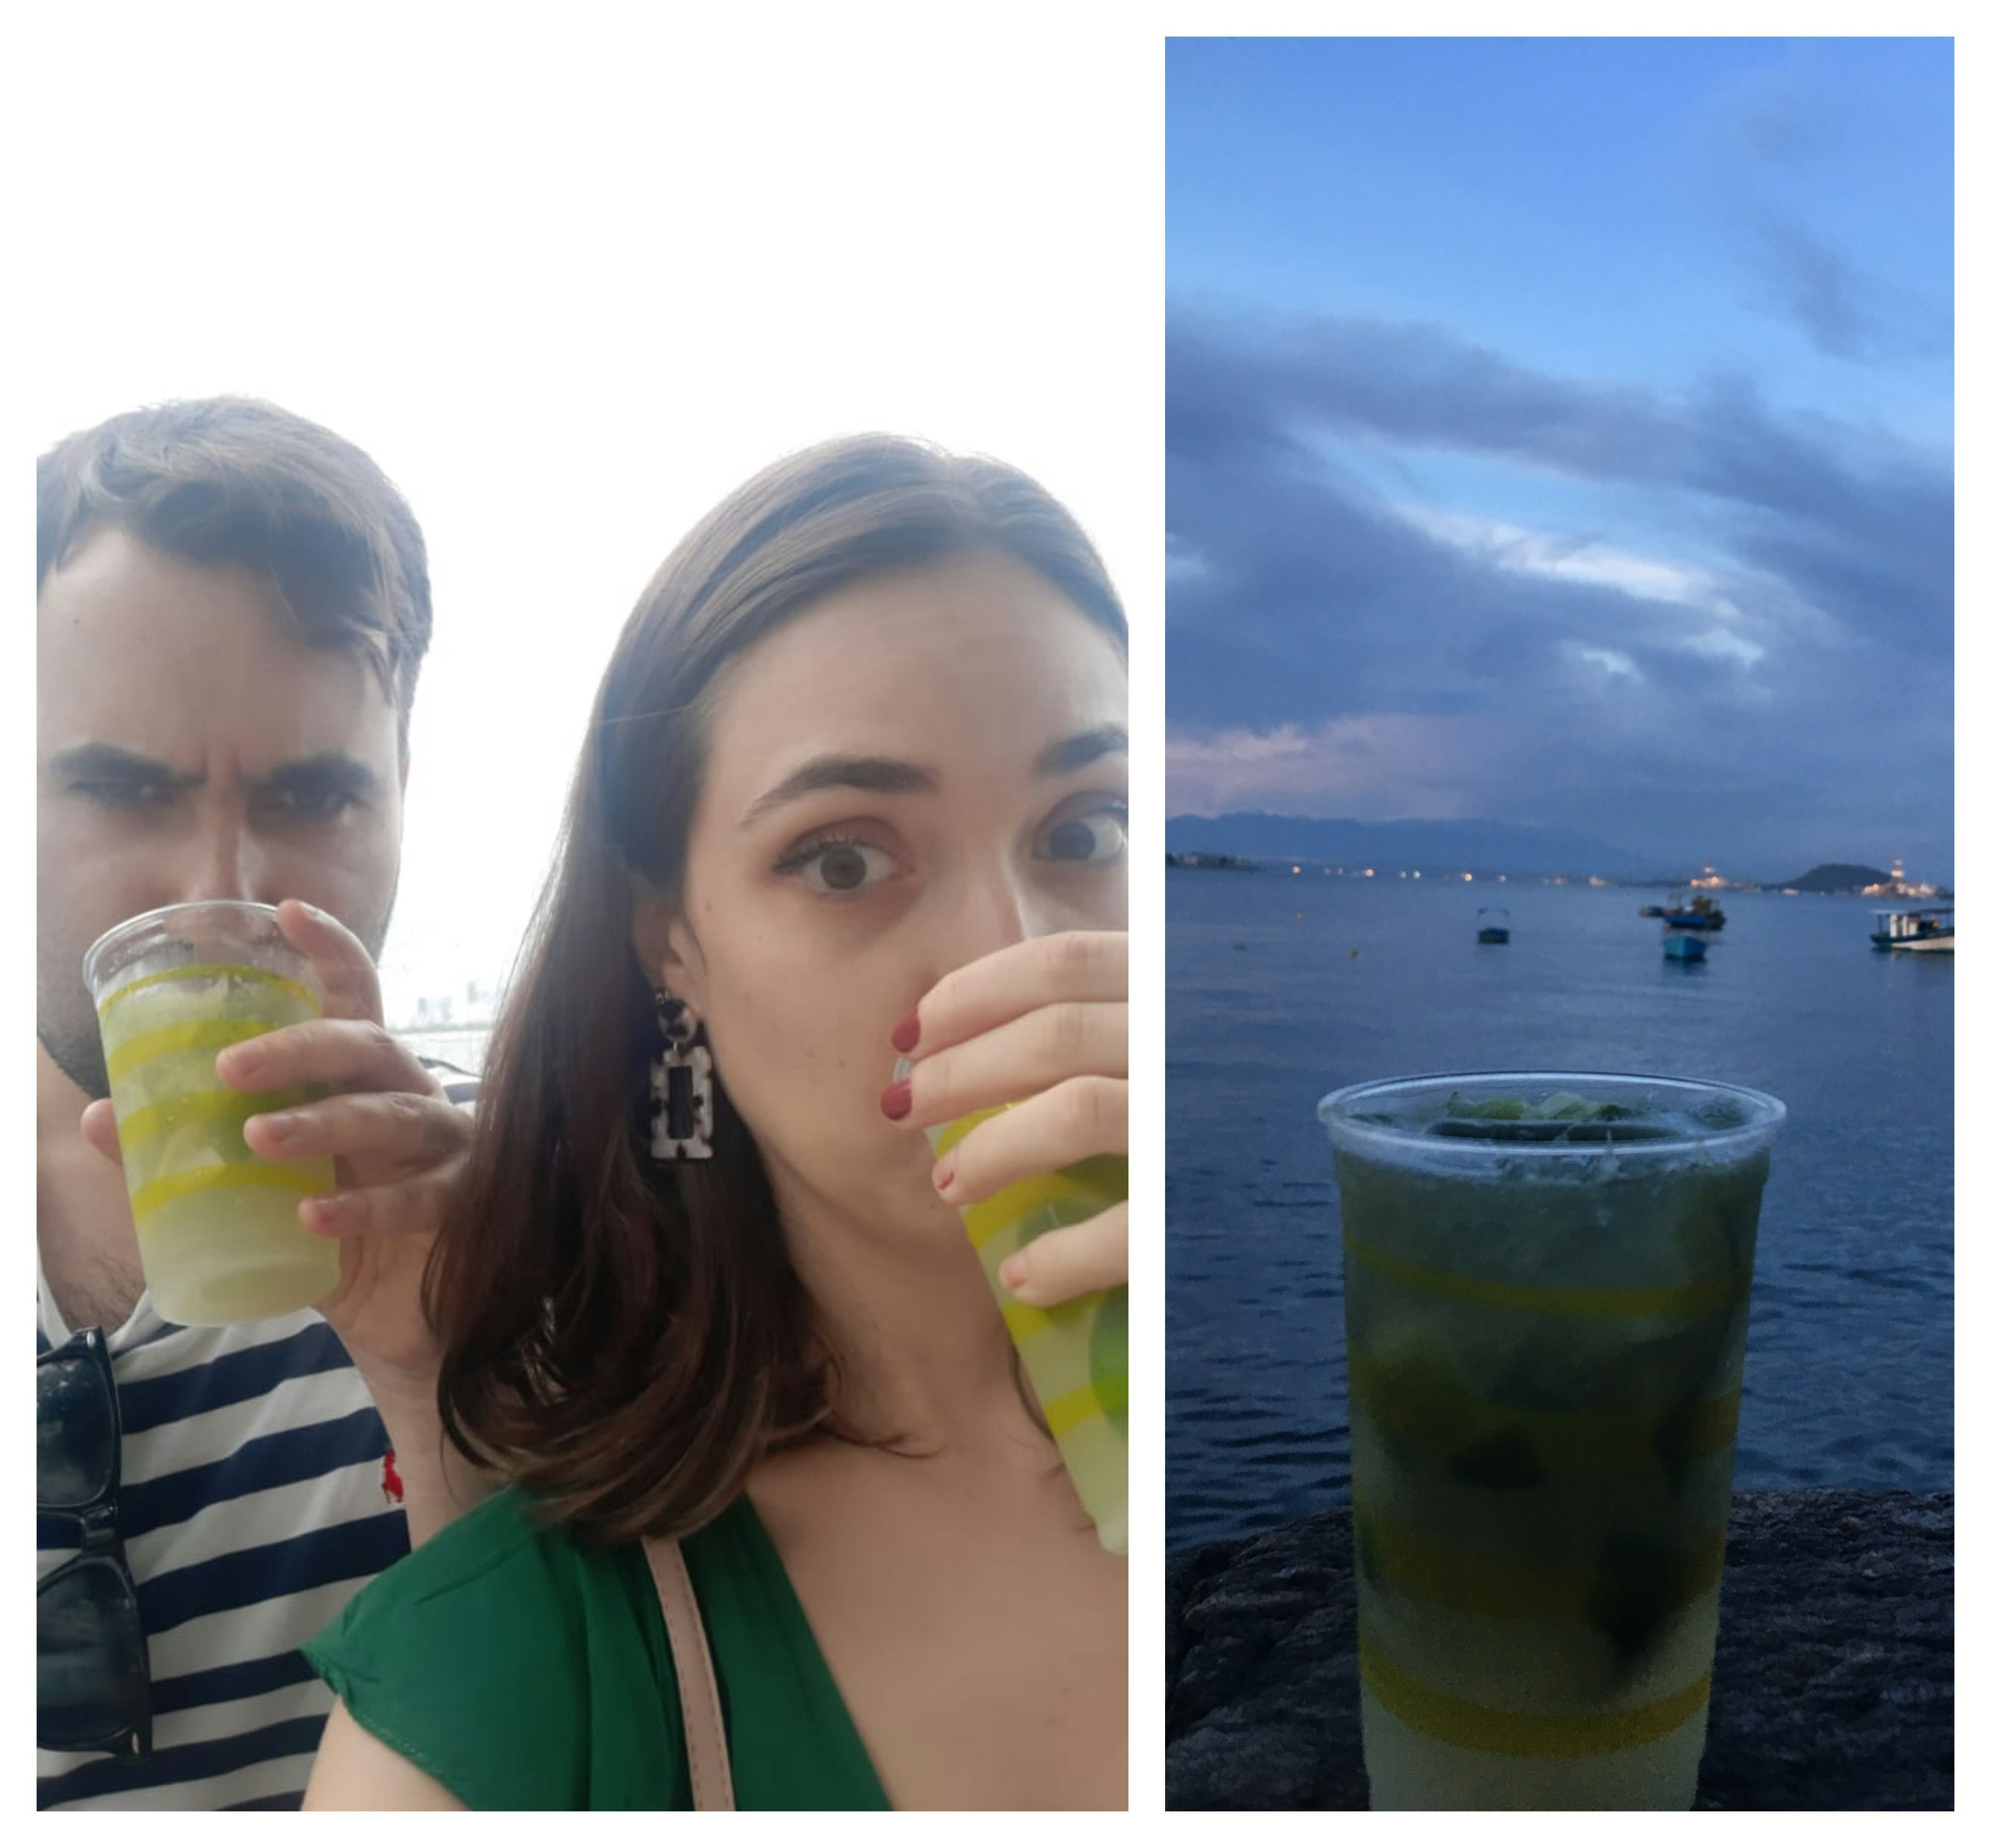 On the left, a man and woman drink caipirinhas from a plastic glass. On the right, a close up of a caipirinha at sunset with the beach and sea in the background